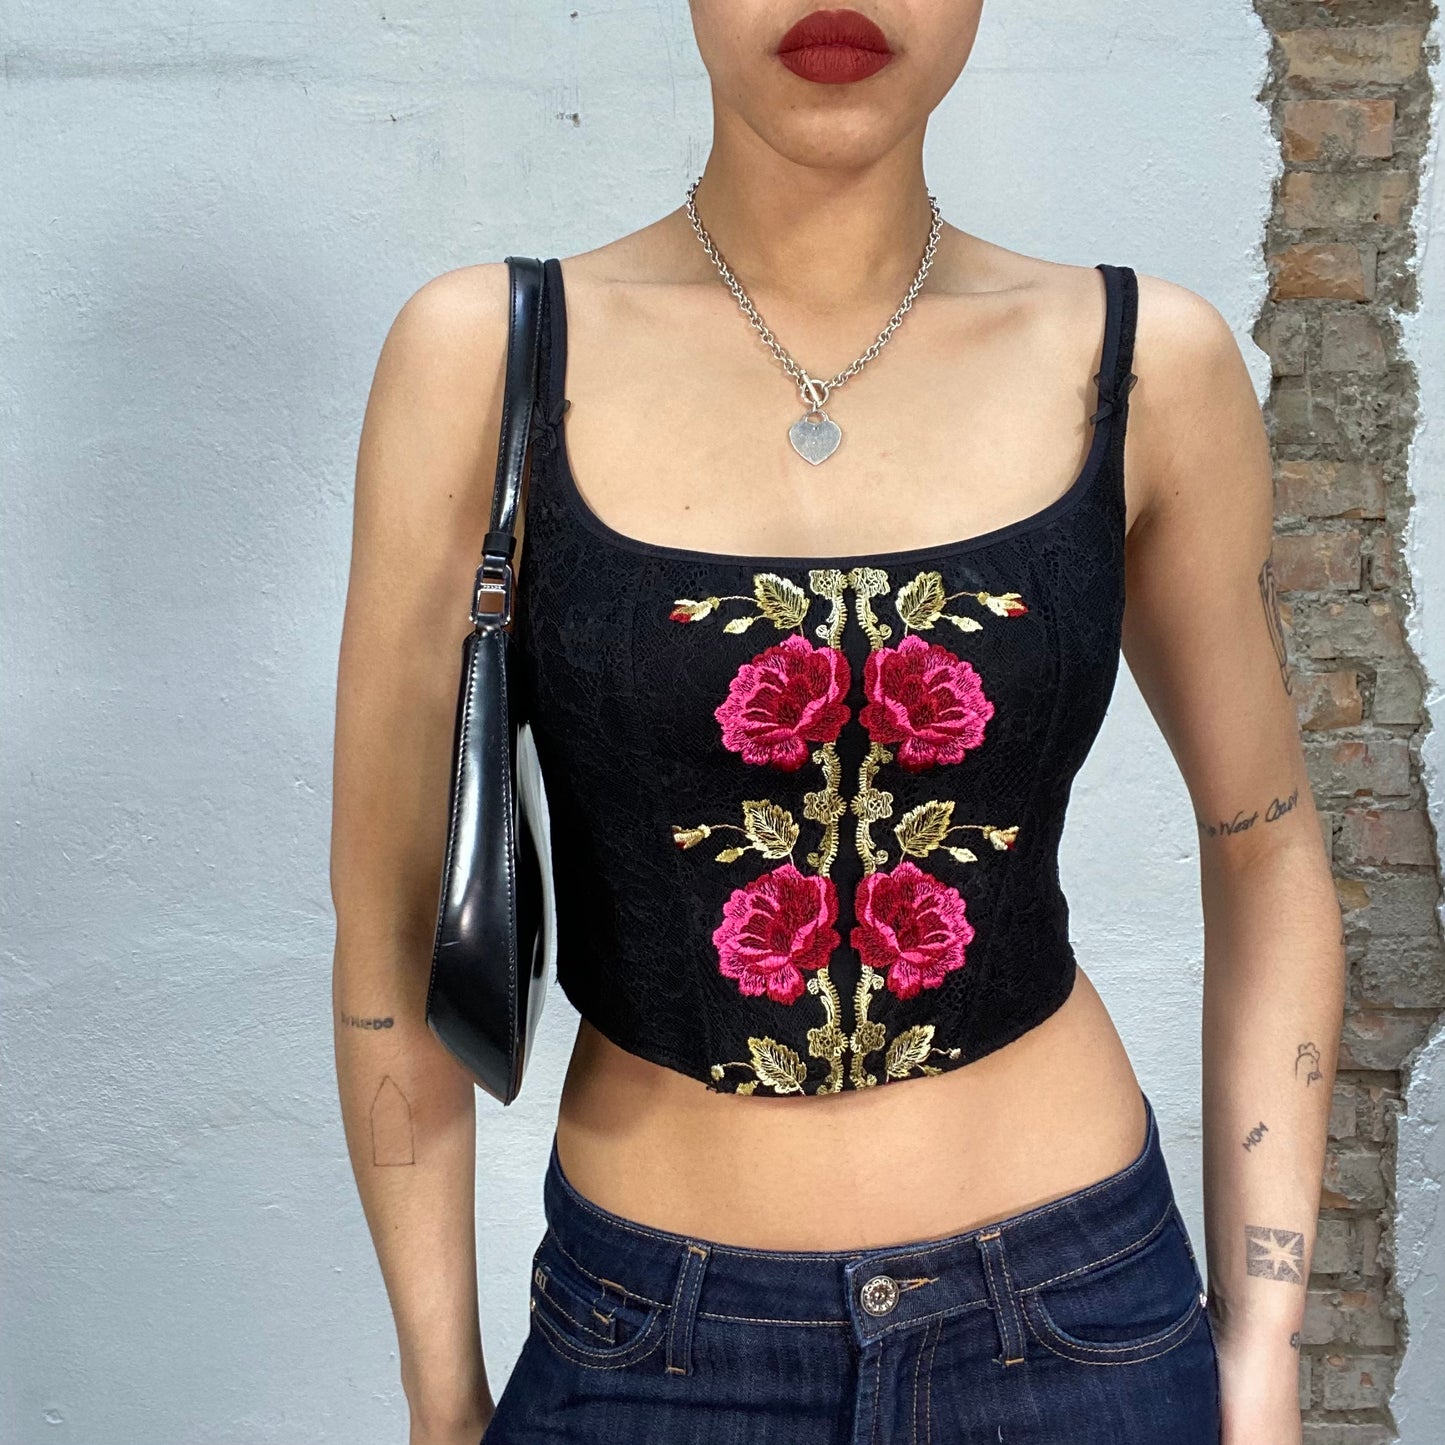 Vintage 2000's Downtown Girl Black Corset Top with Floral